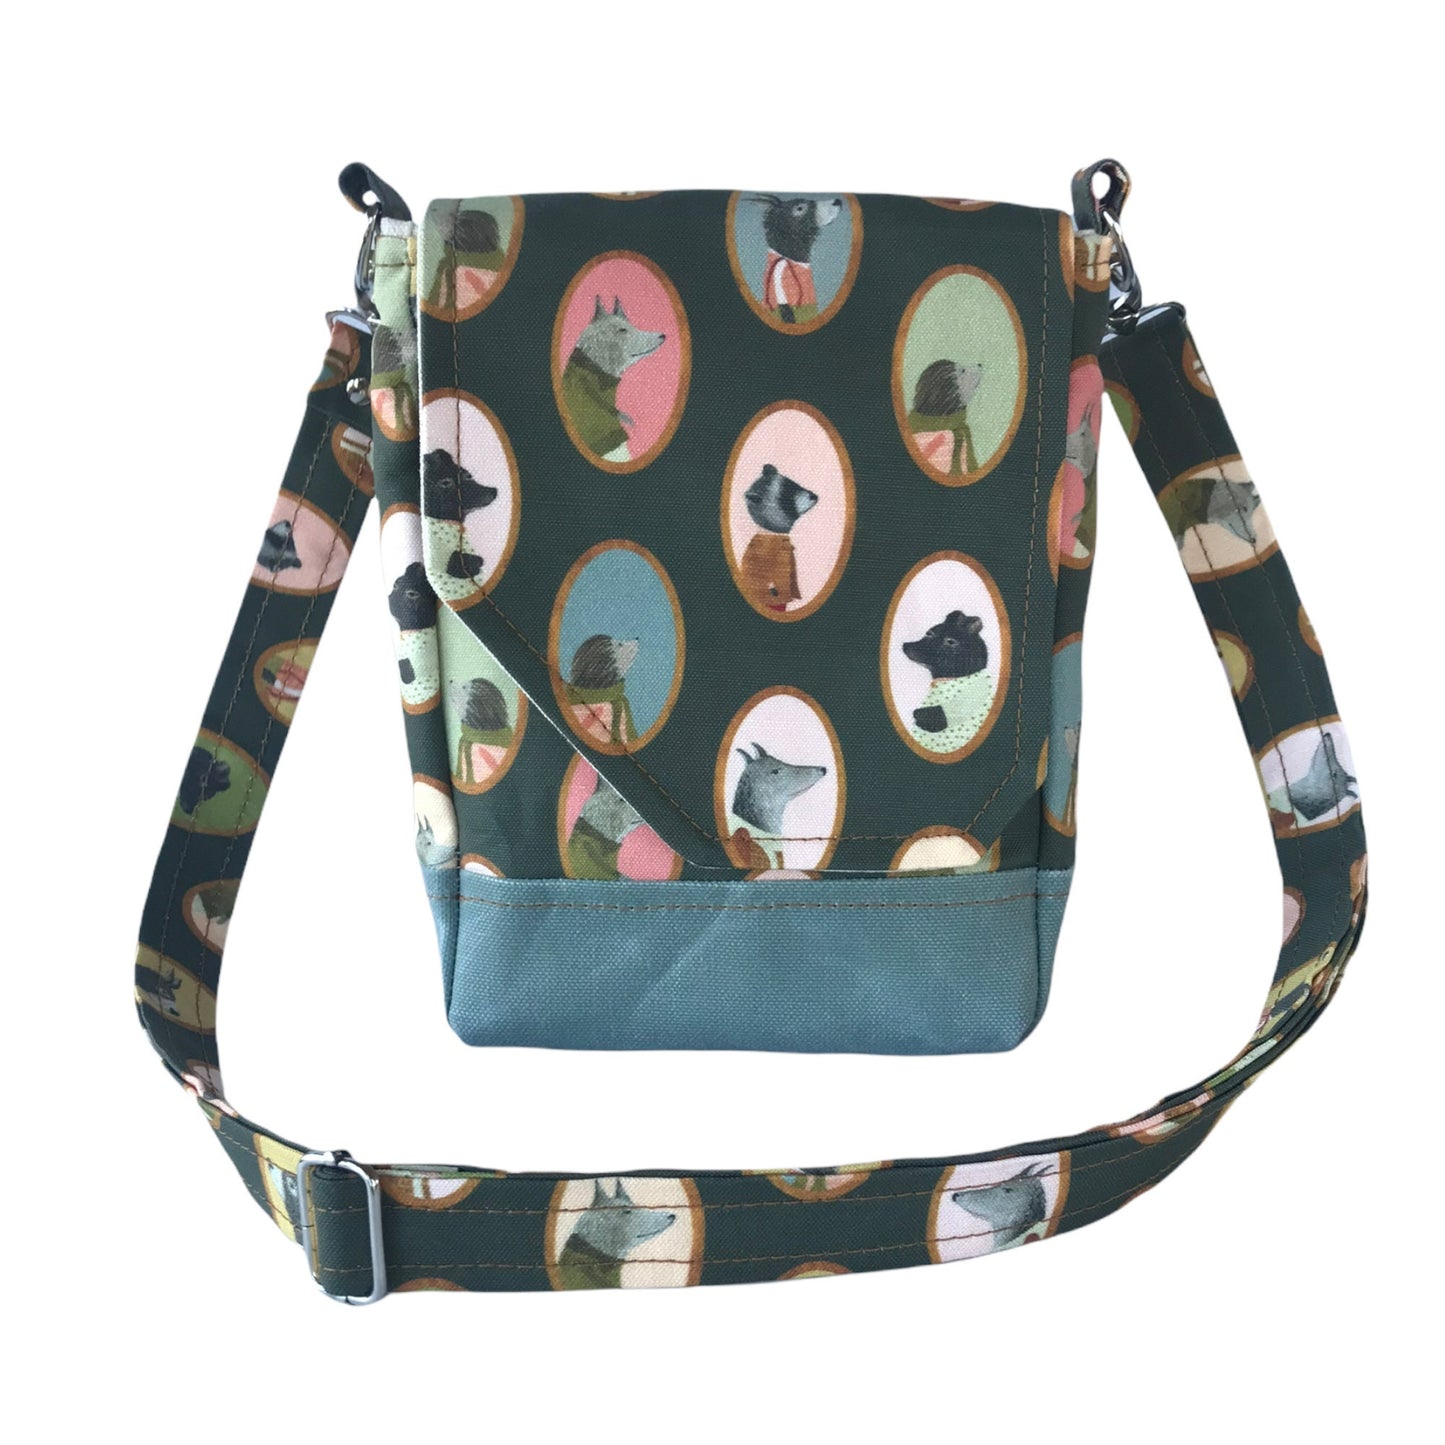 Cameo animal print crossbody bag that will hold your essential items. It has an adjustable strap, two pockets + main compartment